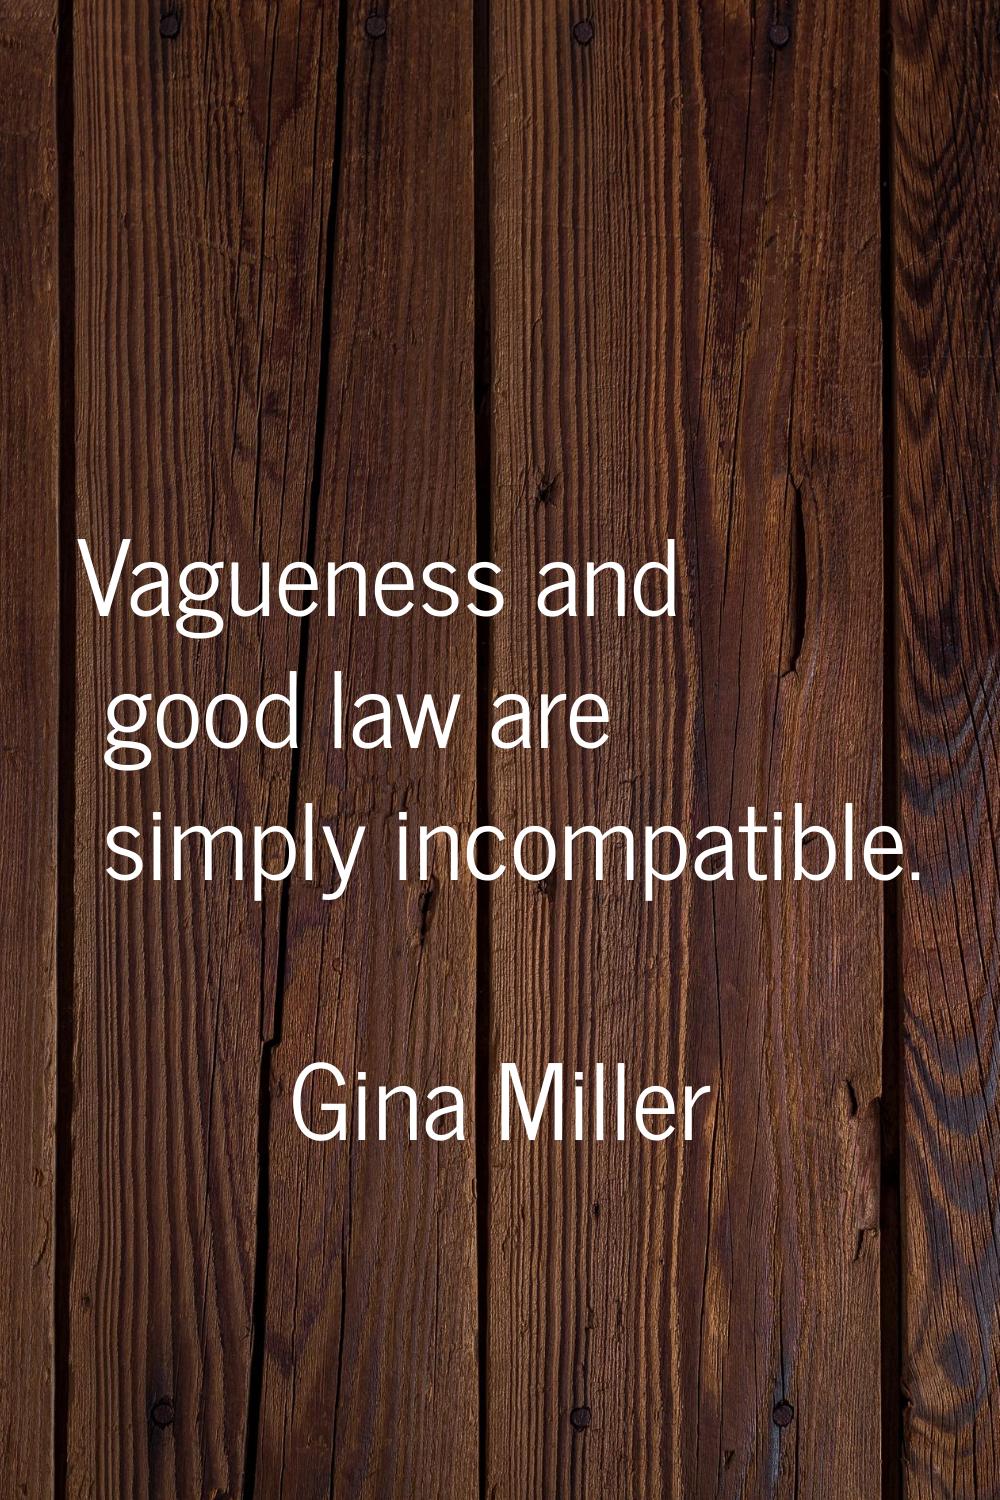 Vagueness and good law are simply incompatible.